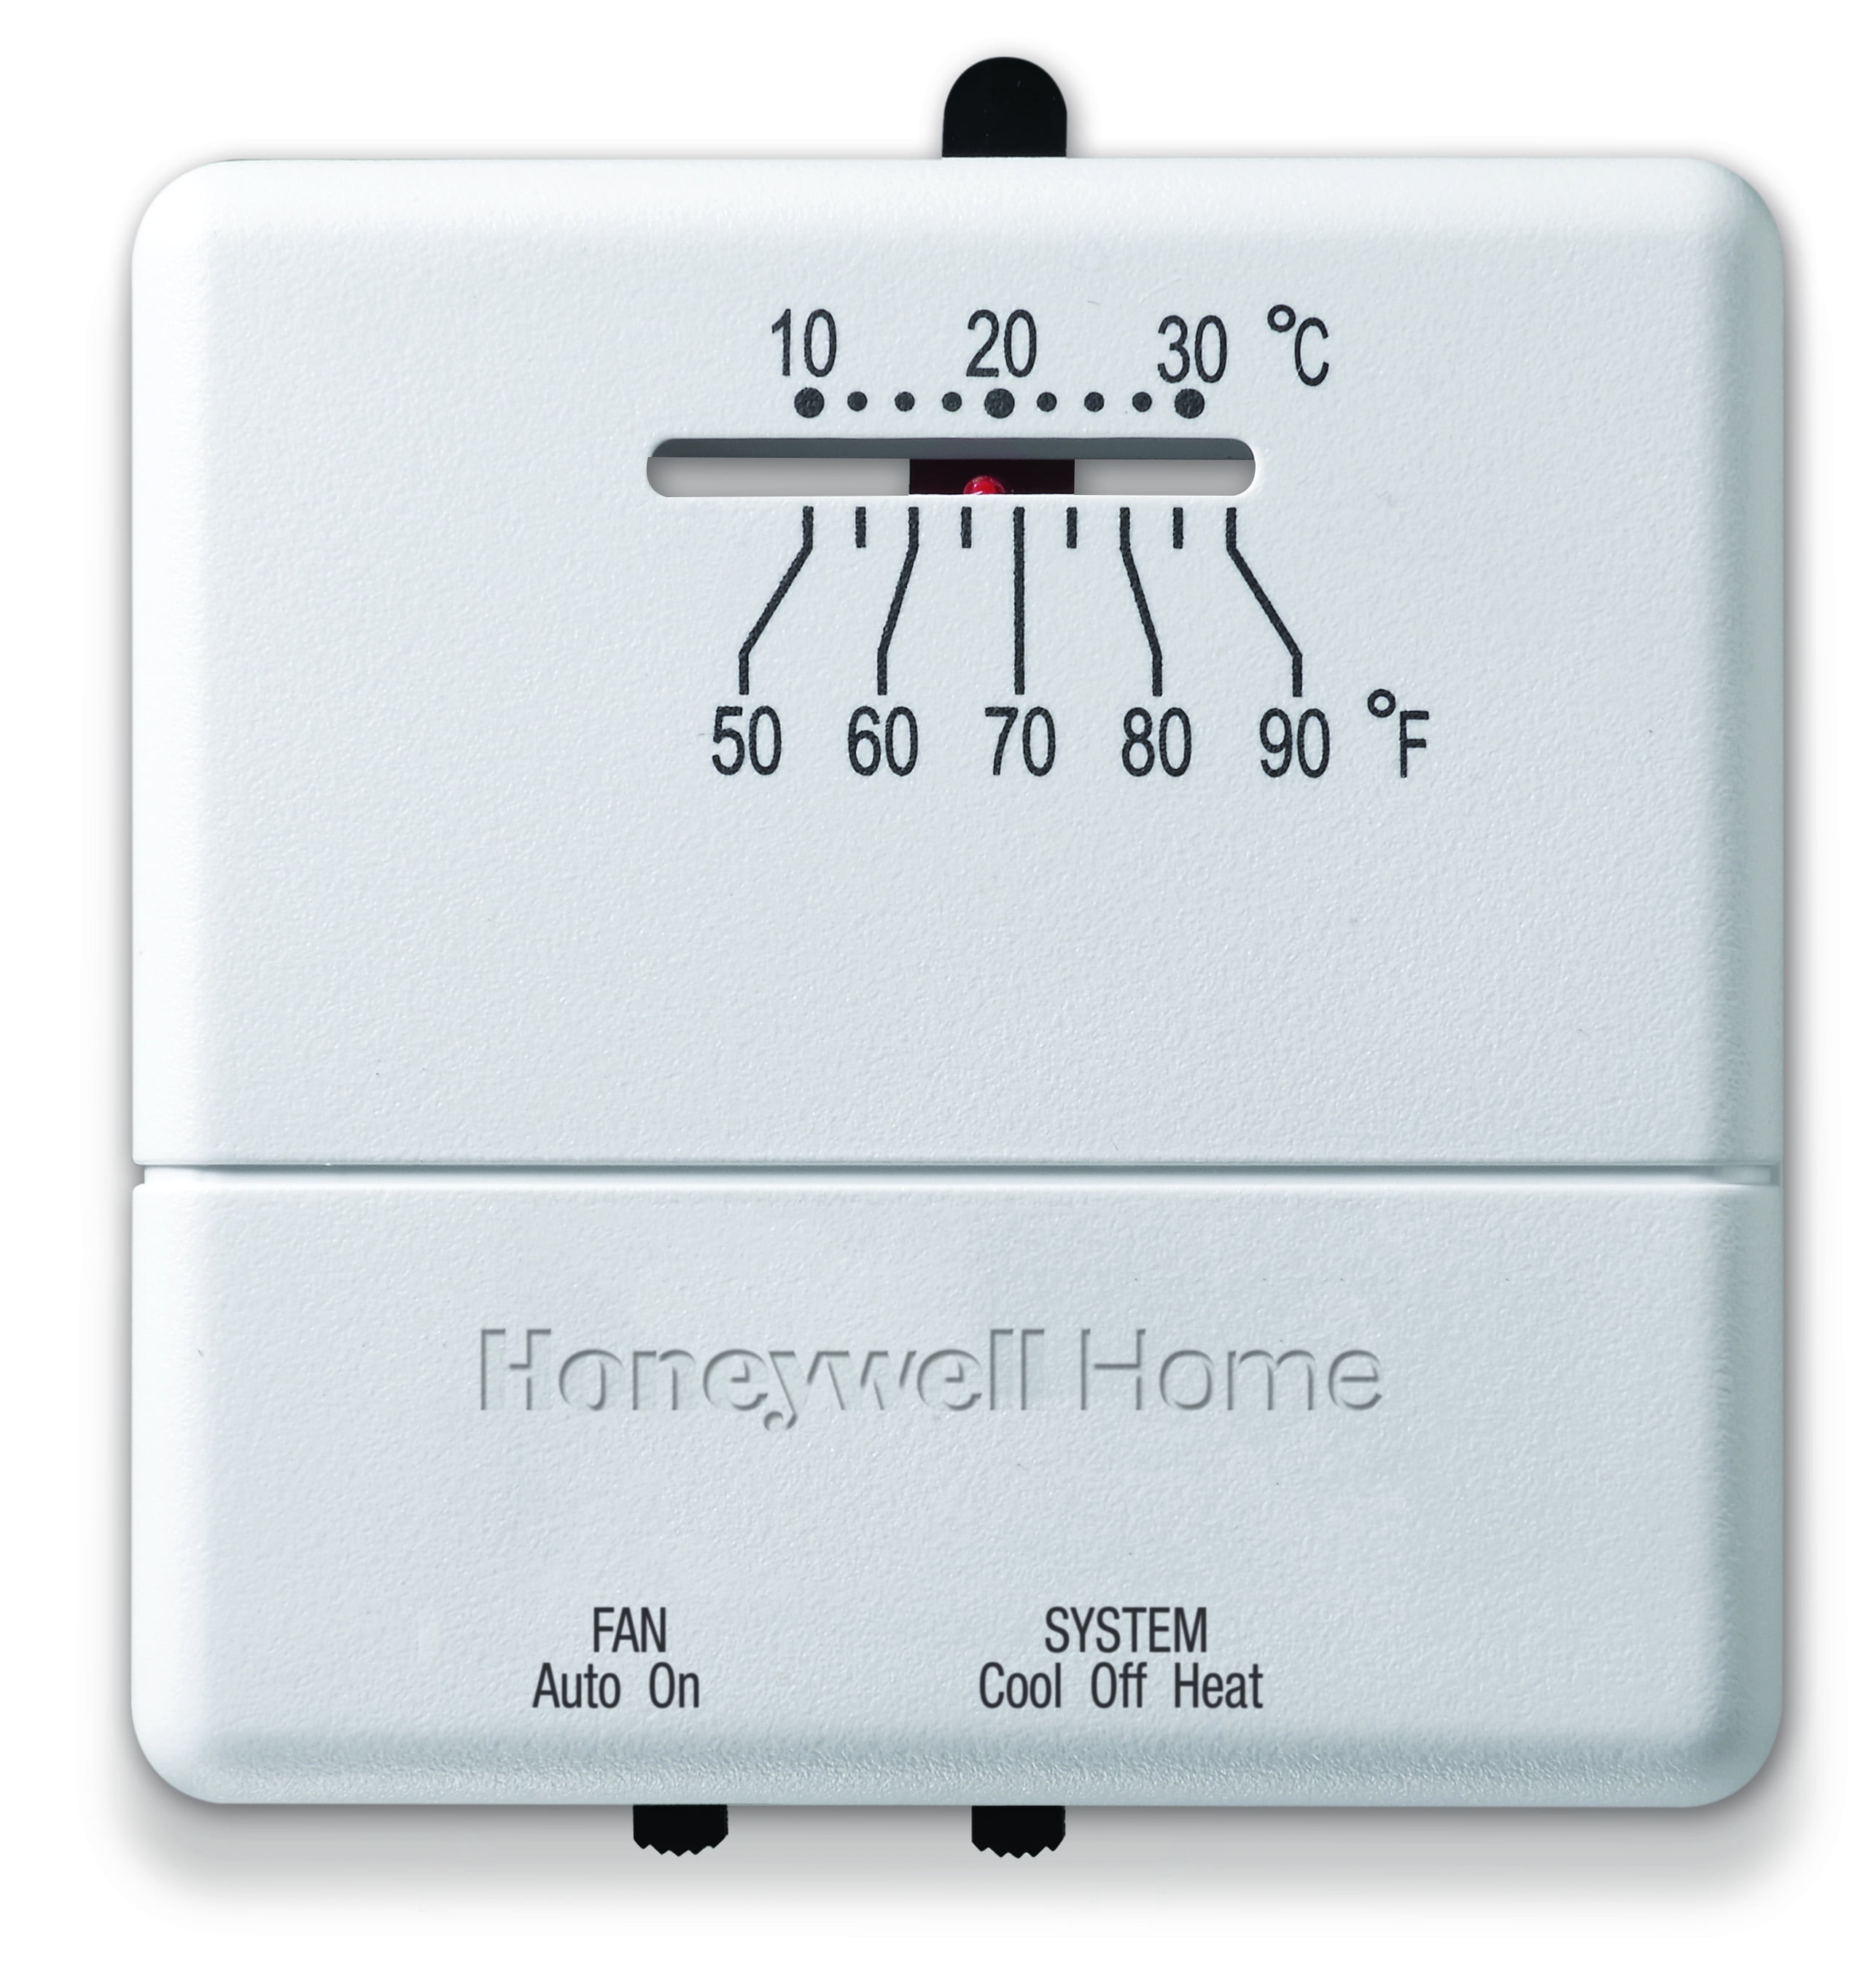 Honeywell Home Heat & Cool Non-Programmable Thermostat (White, CT31A1003) $7 + Free S&H w/ Walmart+ or $35+